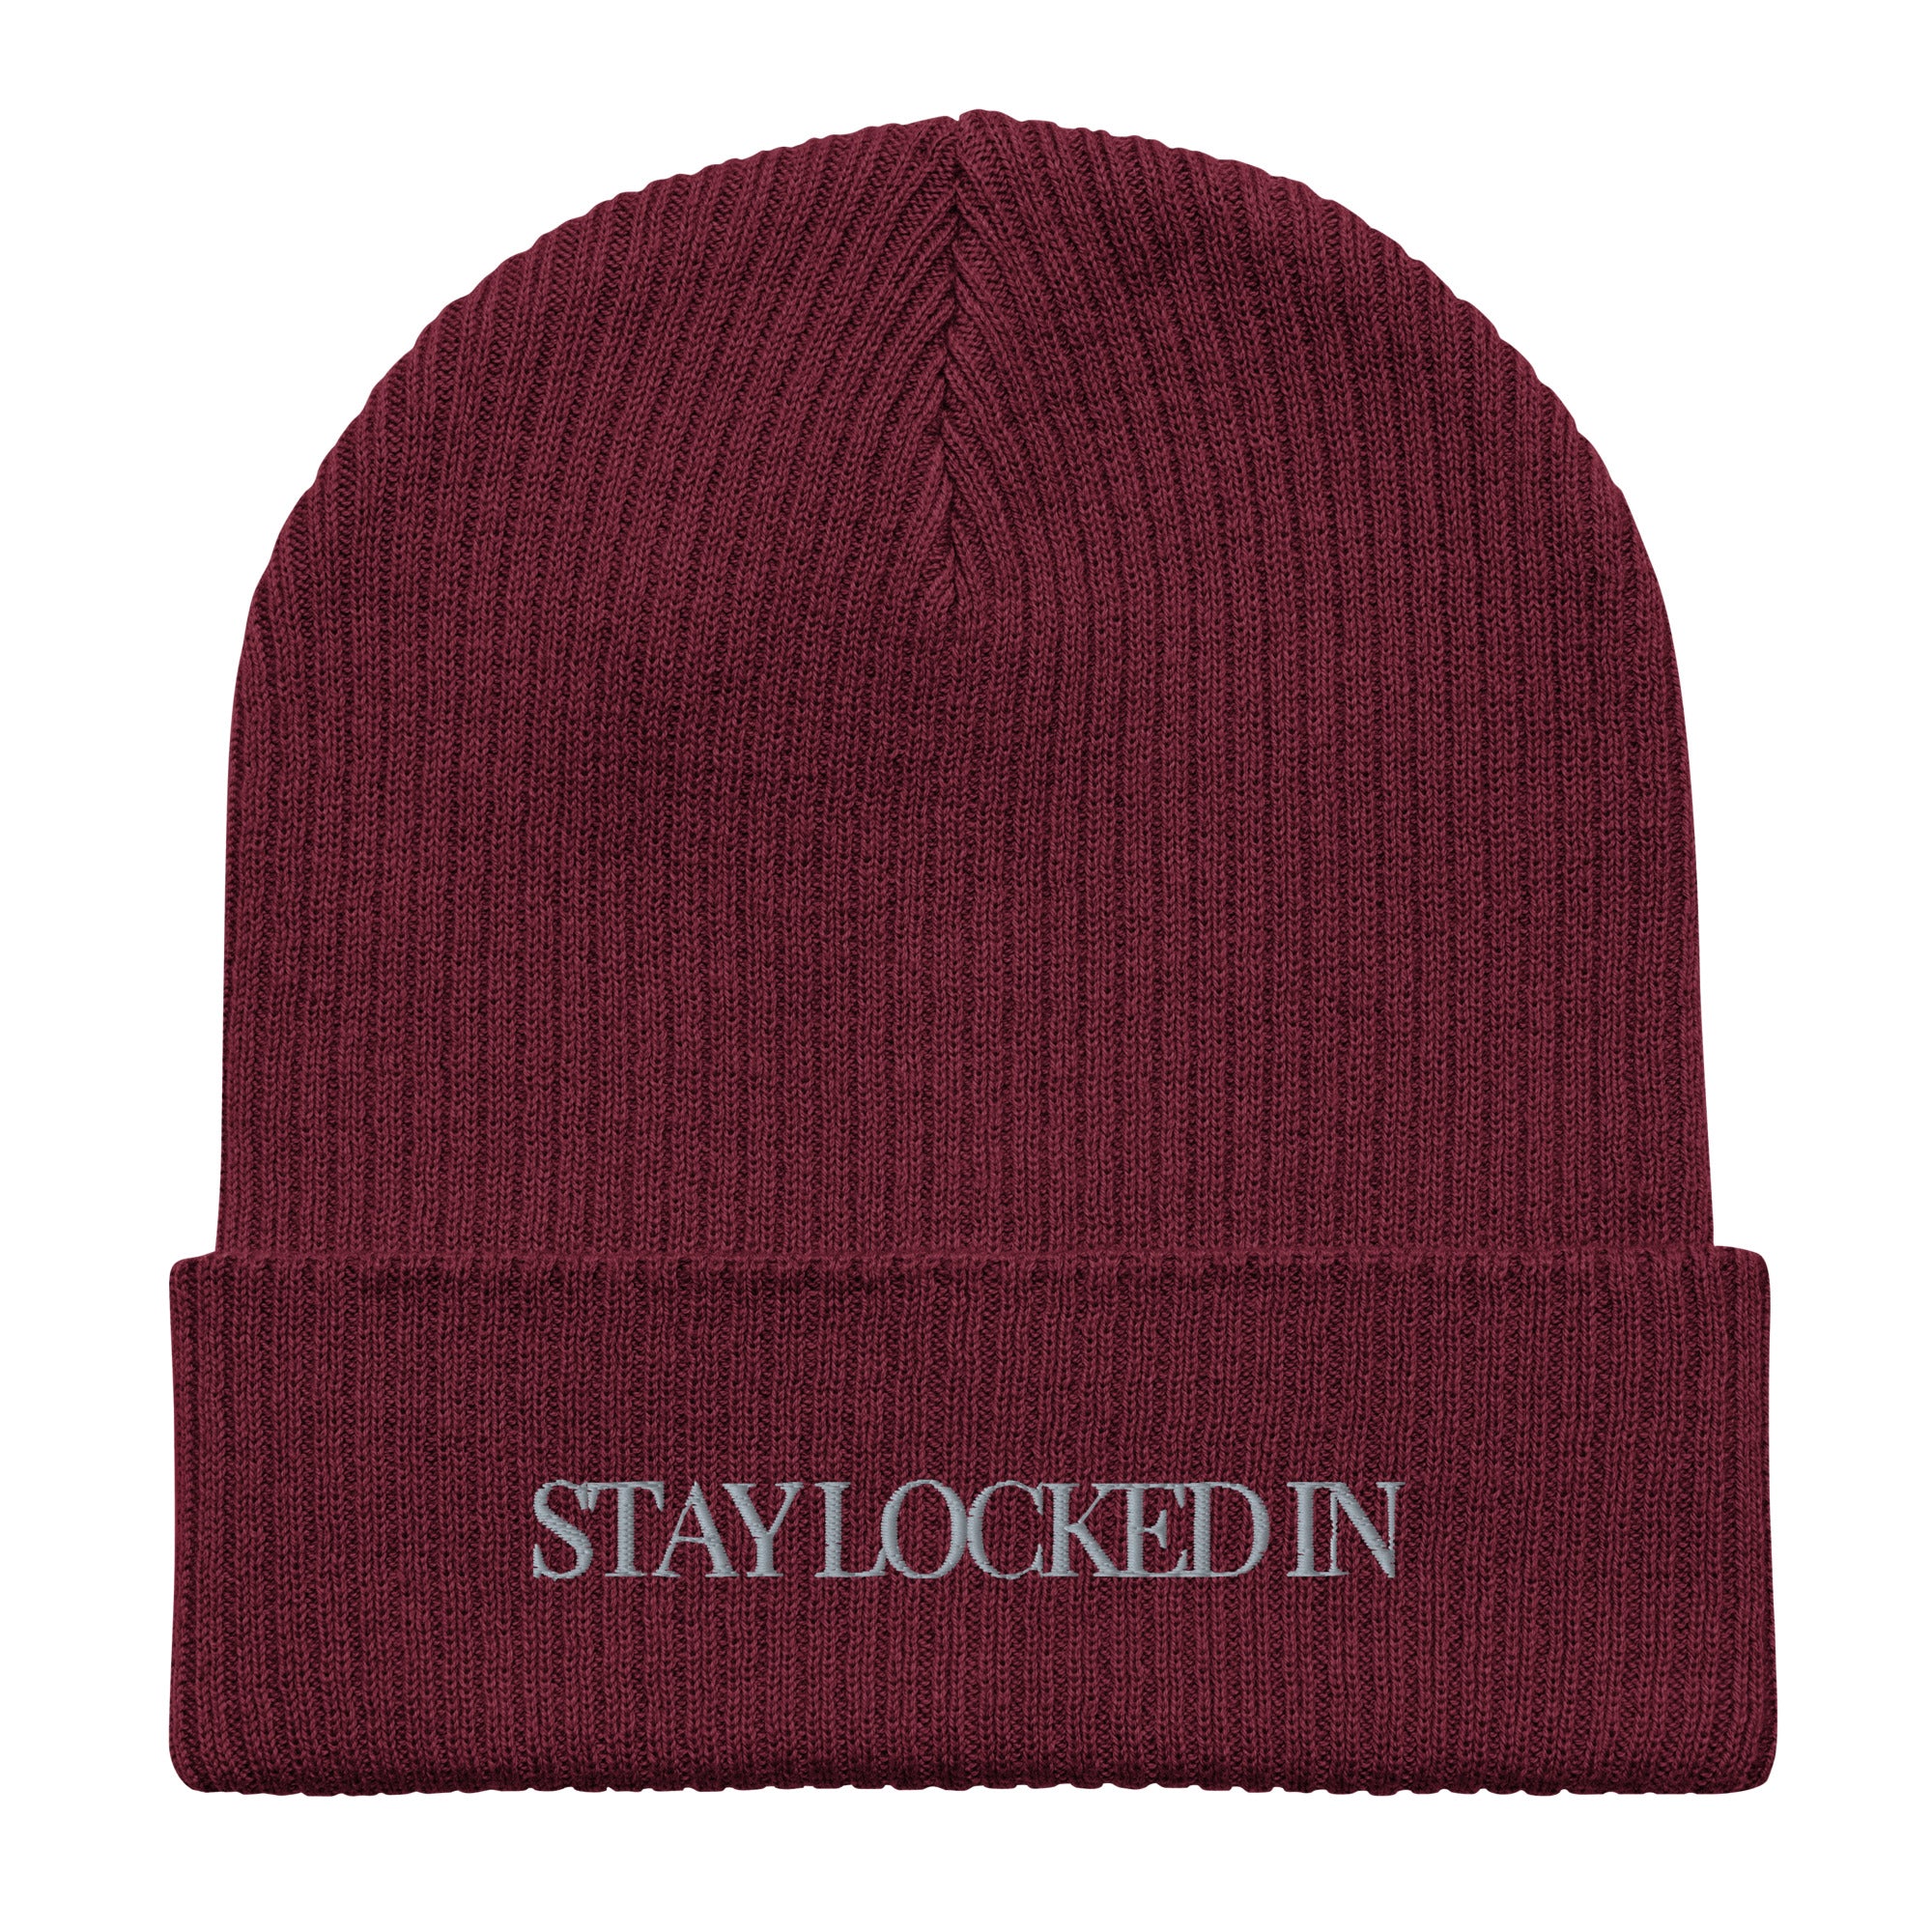 "Stay Locked In" Embroidered Typeface Organic Beanie